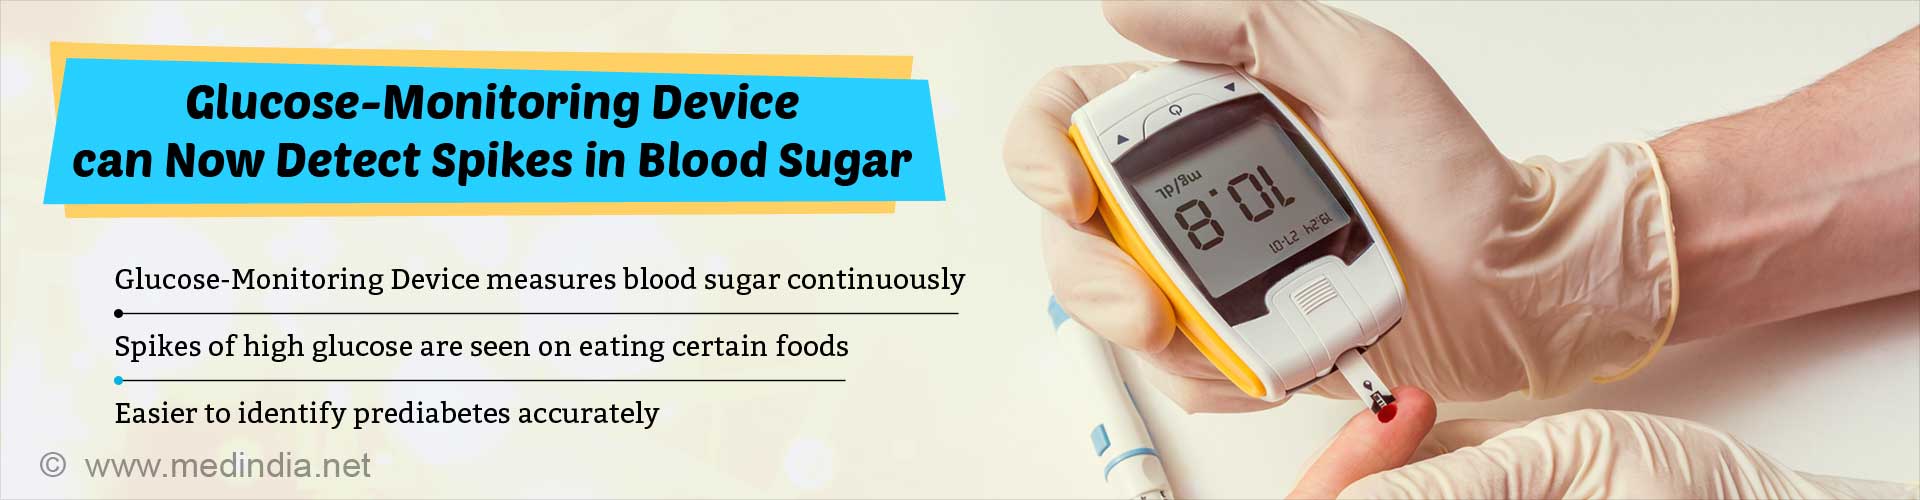 Glucose-monitoring device can now detect spikes in blood sugar. Glucose-monitoring device measures blood sugar continuously. Spikes of high glucose are seen on eating certain foods. Easier to identify prediabetes accurately.